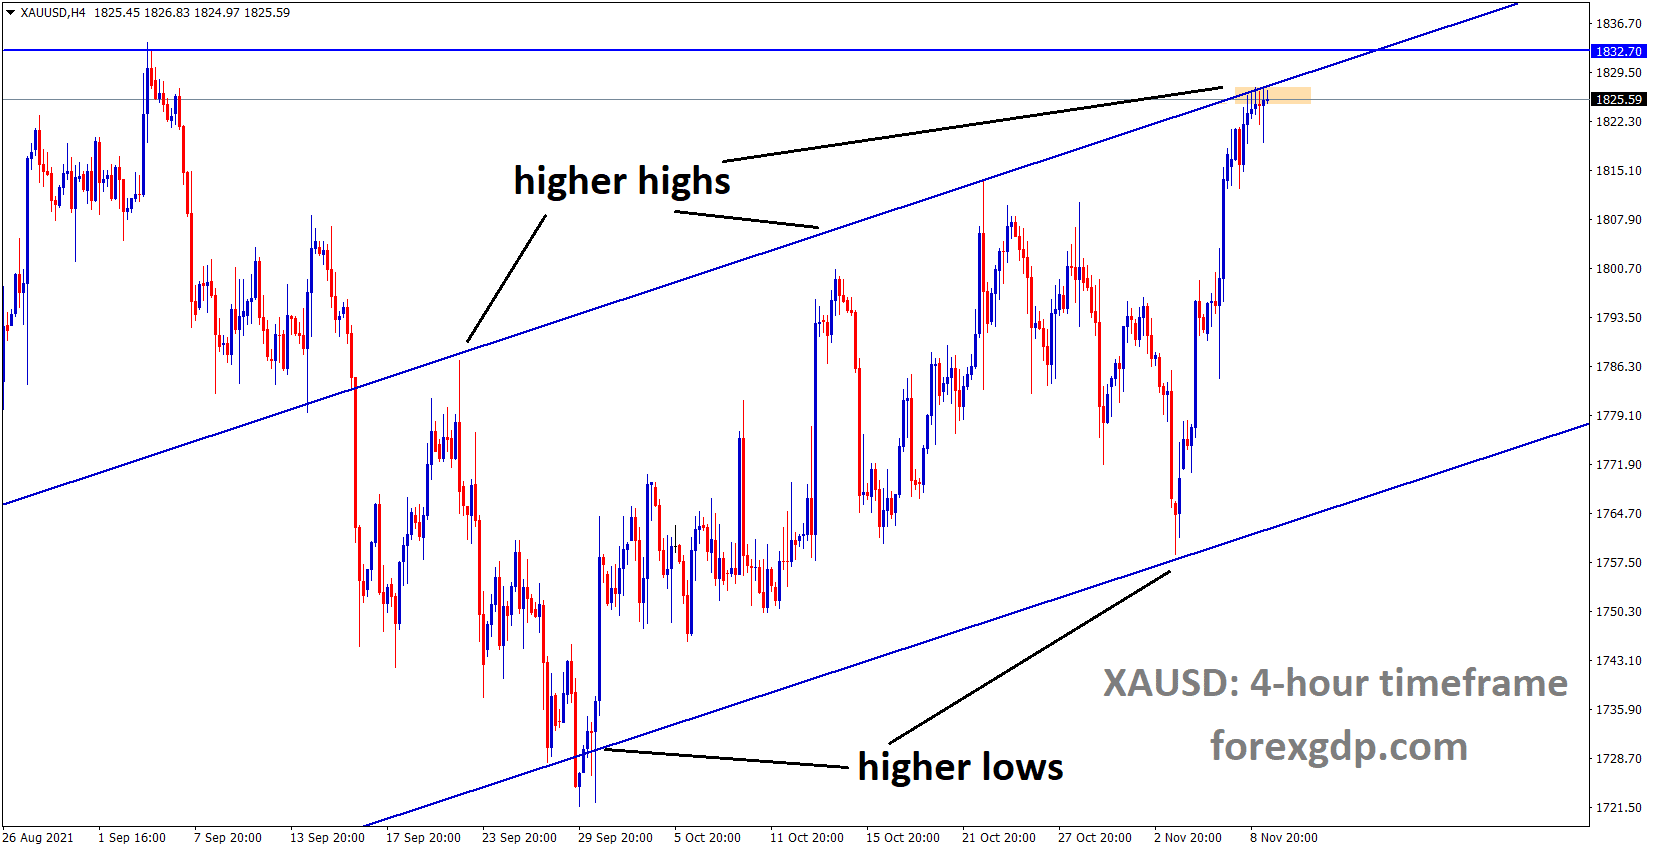 XAUUSD Gold price is moving in an Ascending channel and market reached the higher high